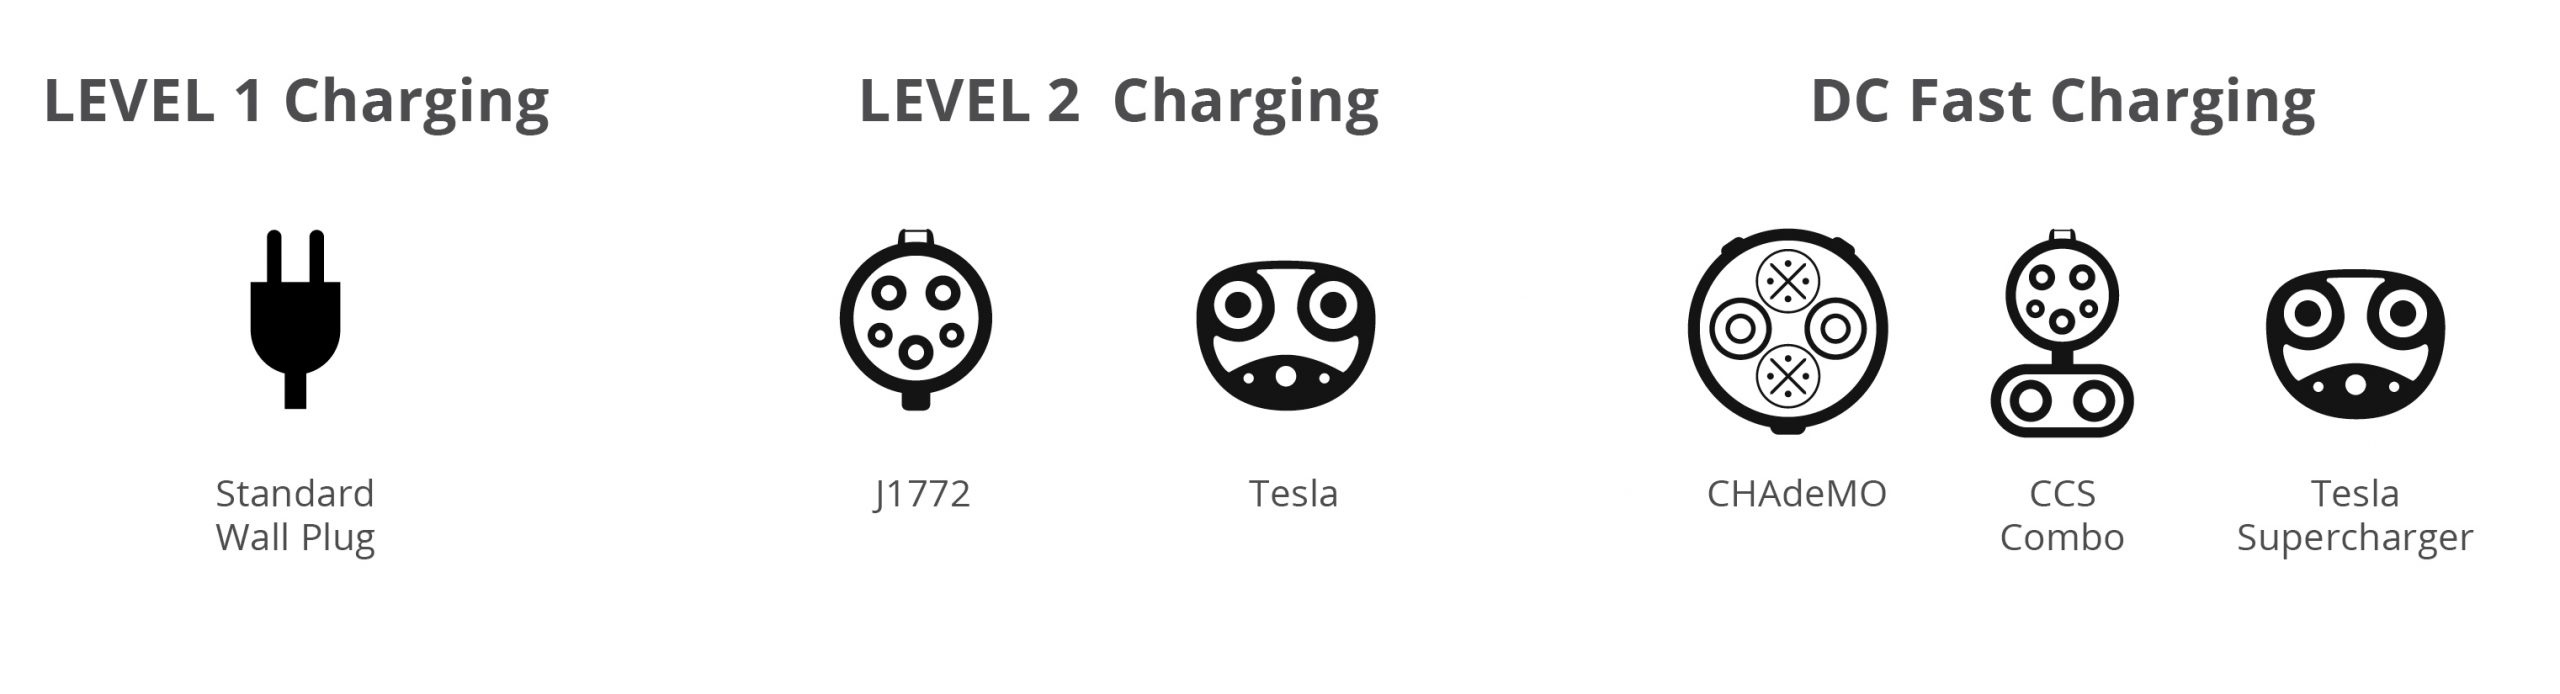 The Levels of Charging and their corresponding plugs